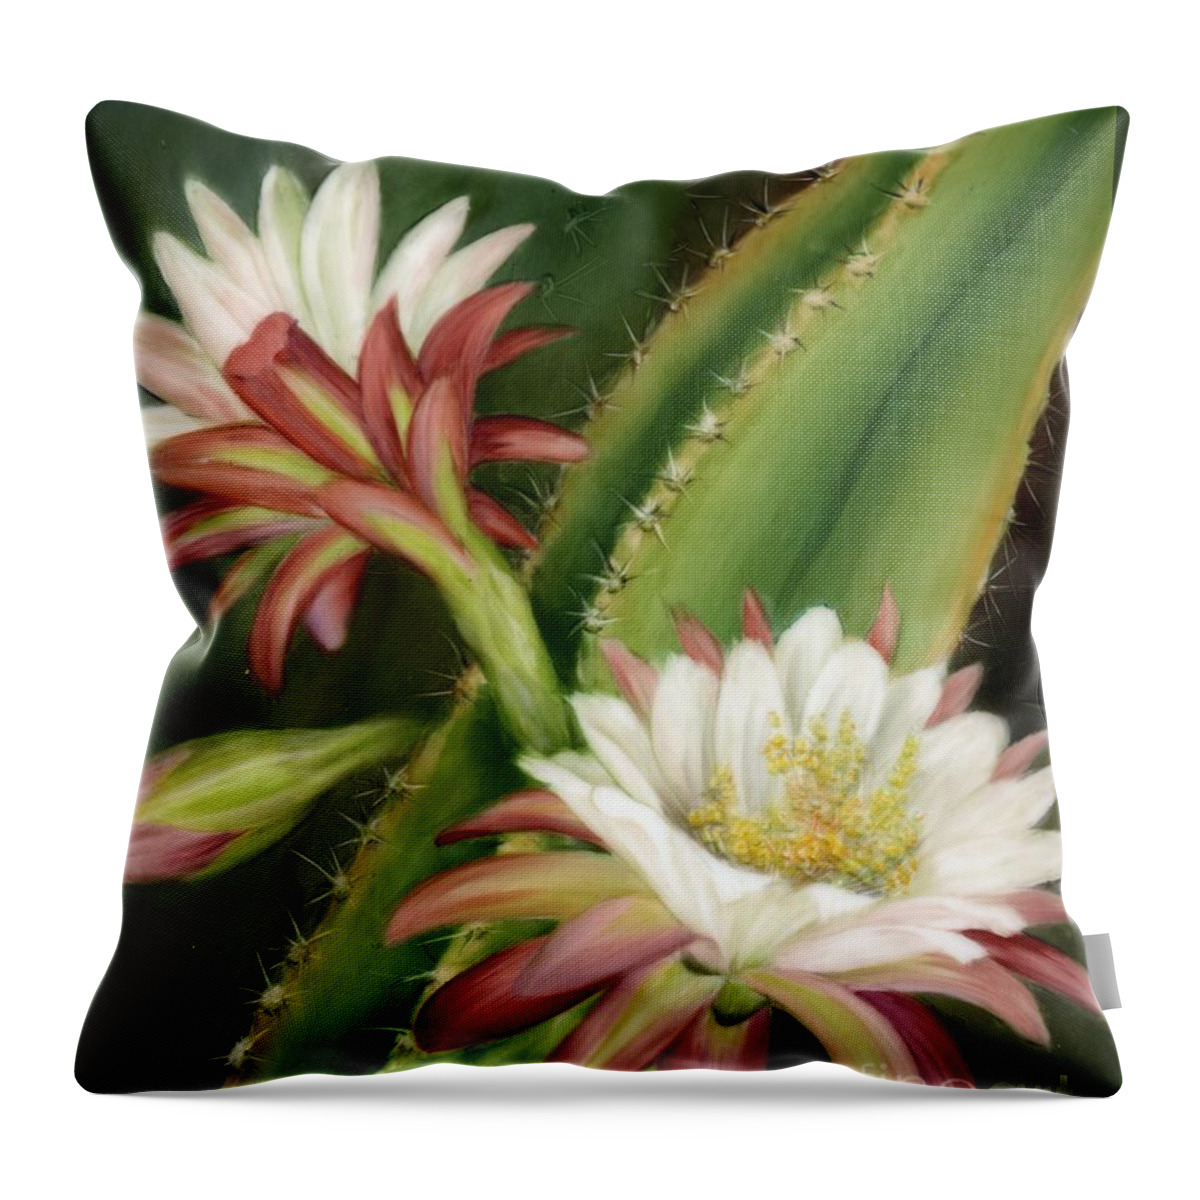 Floral Throw Pillow featuring the painting Night Cereus by Summer Celeste